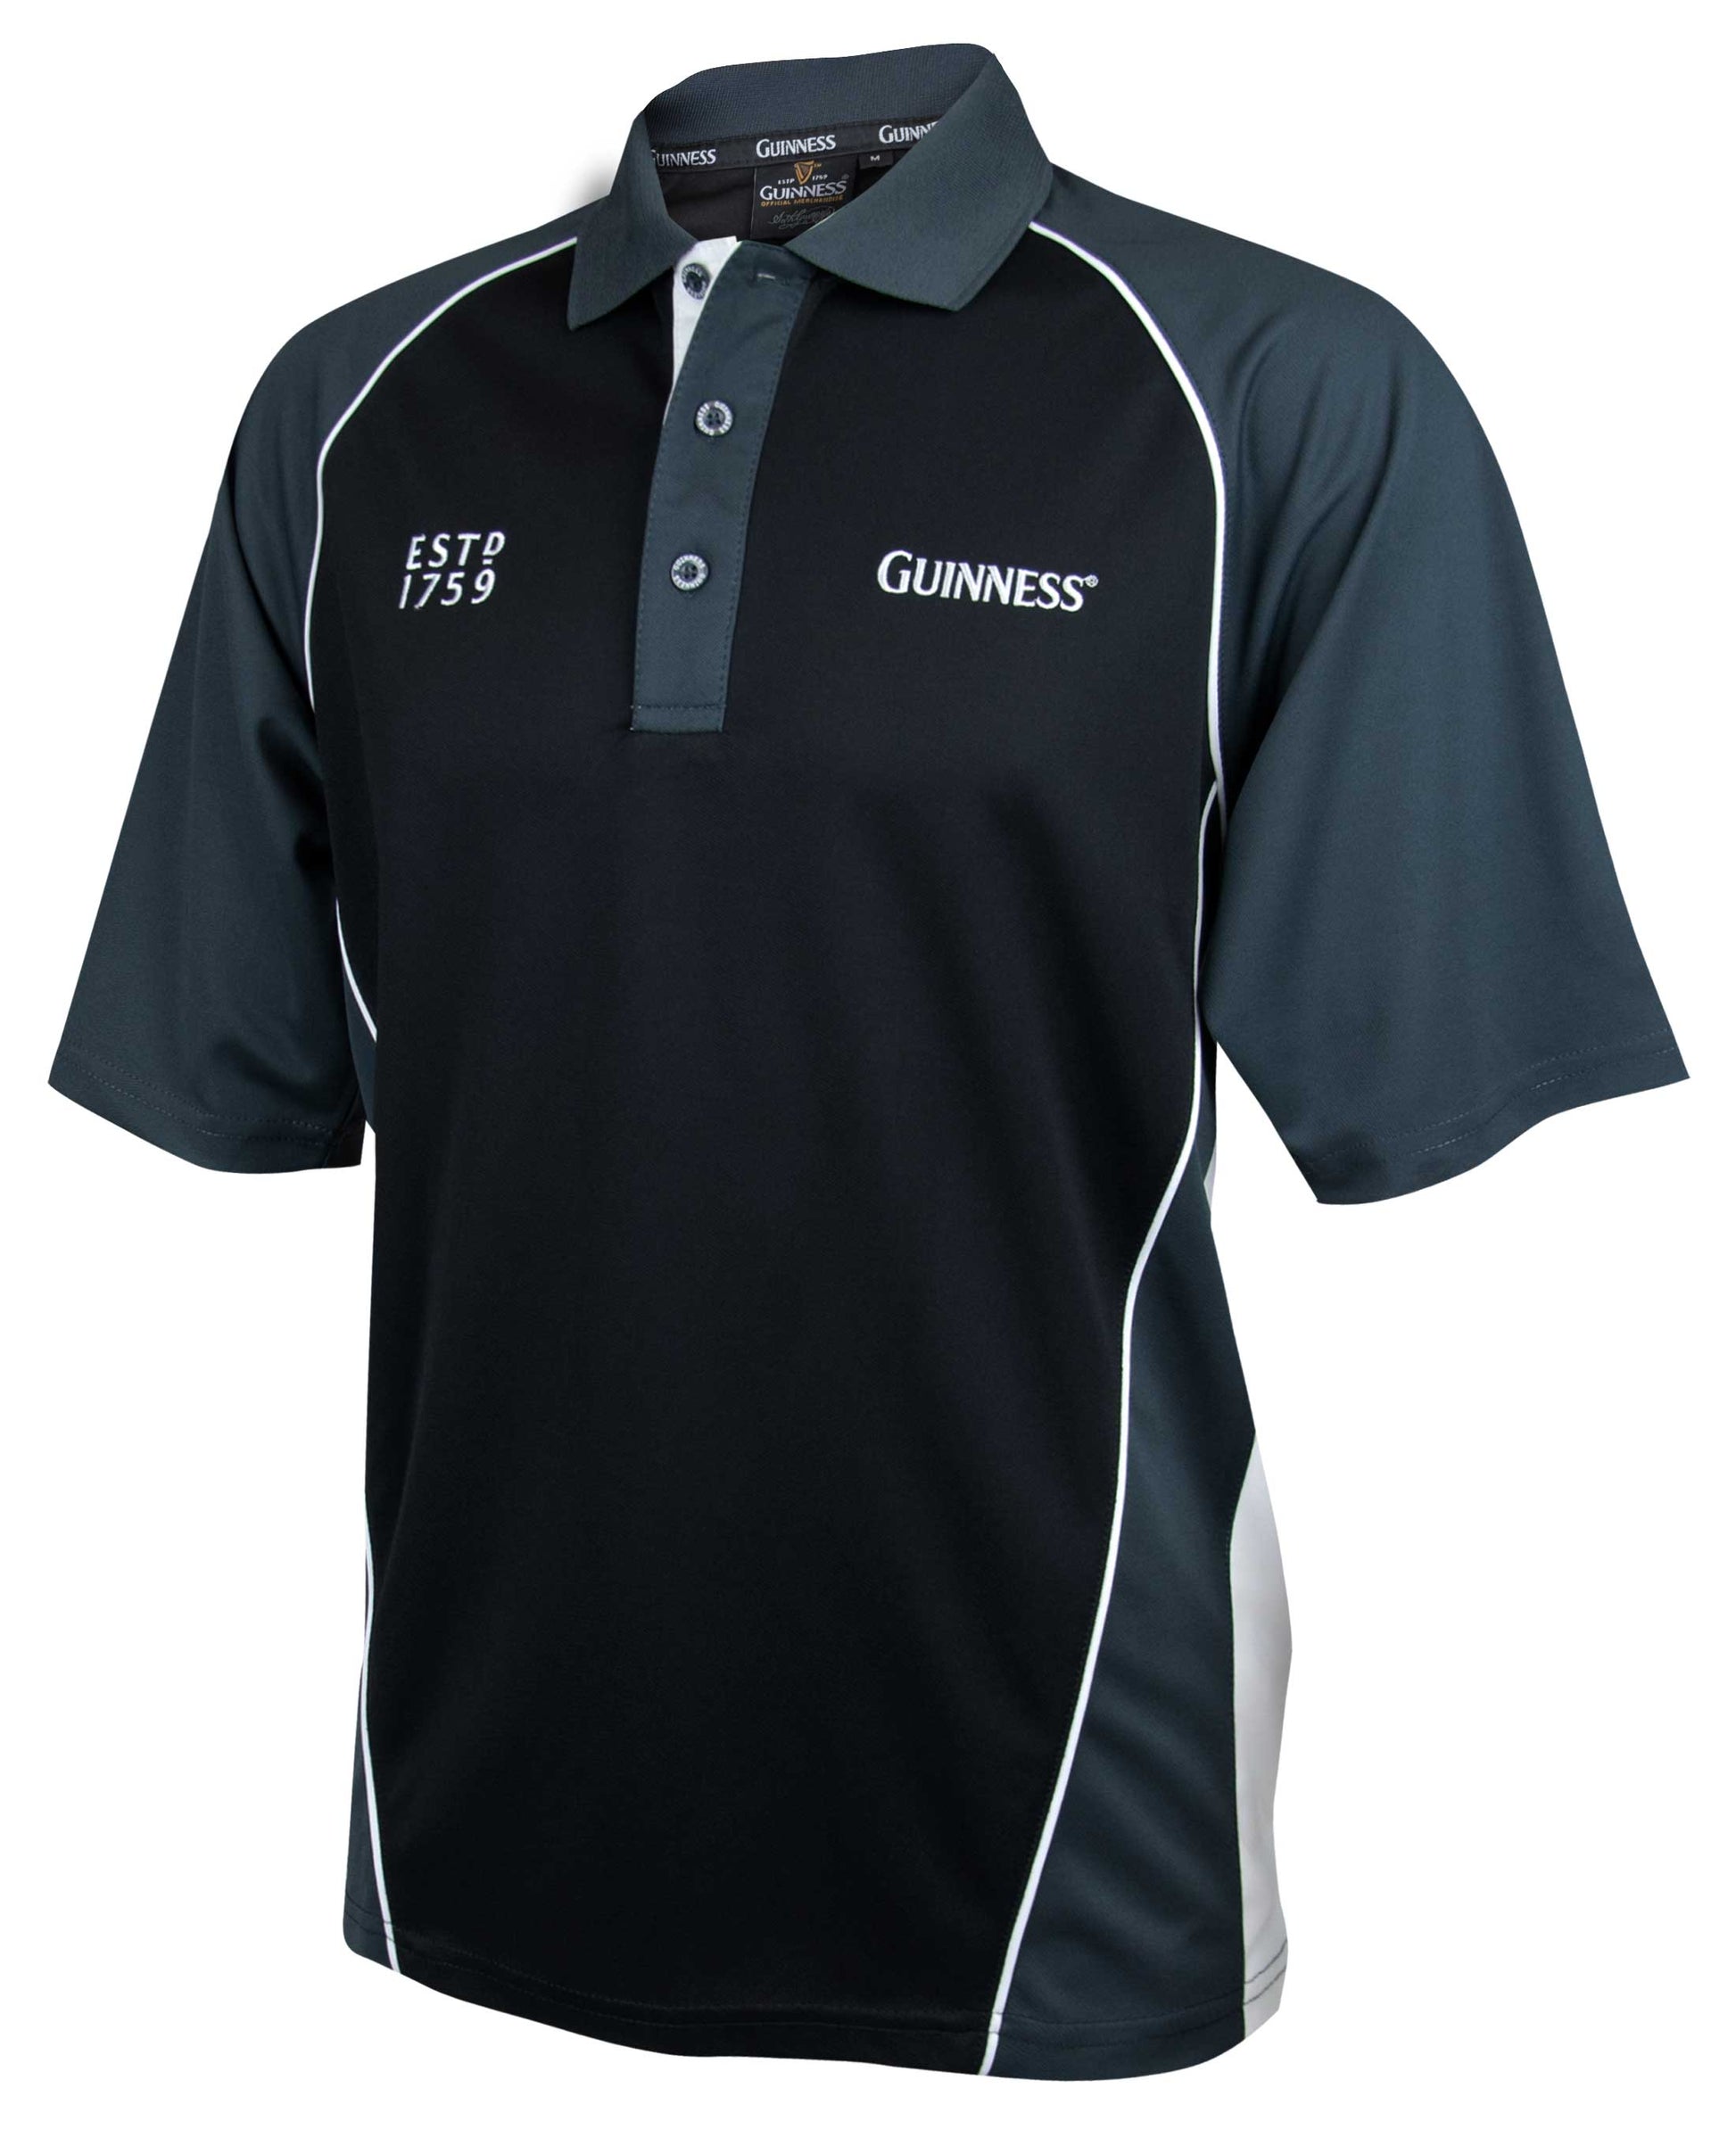 A moisture wicking, black and white Guinness Performance Golf Shirt with the embroidered Guinness logo.